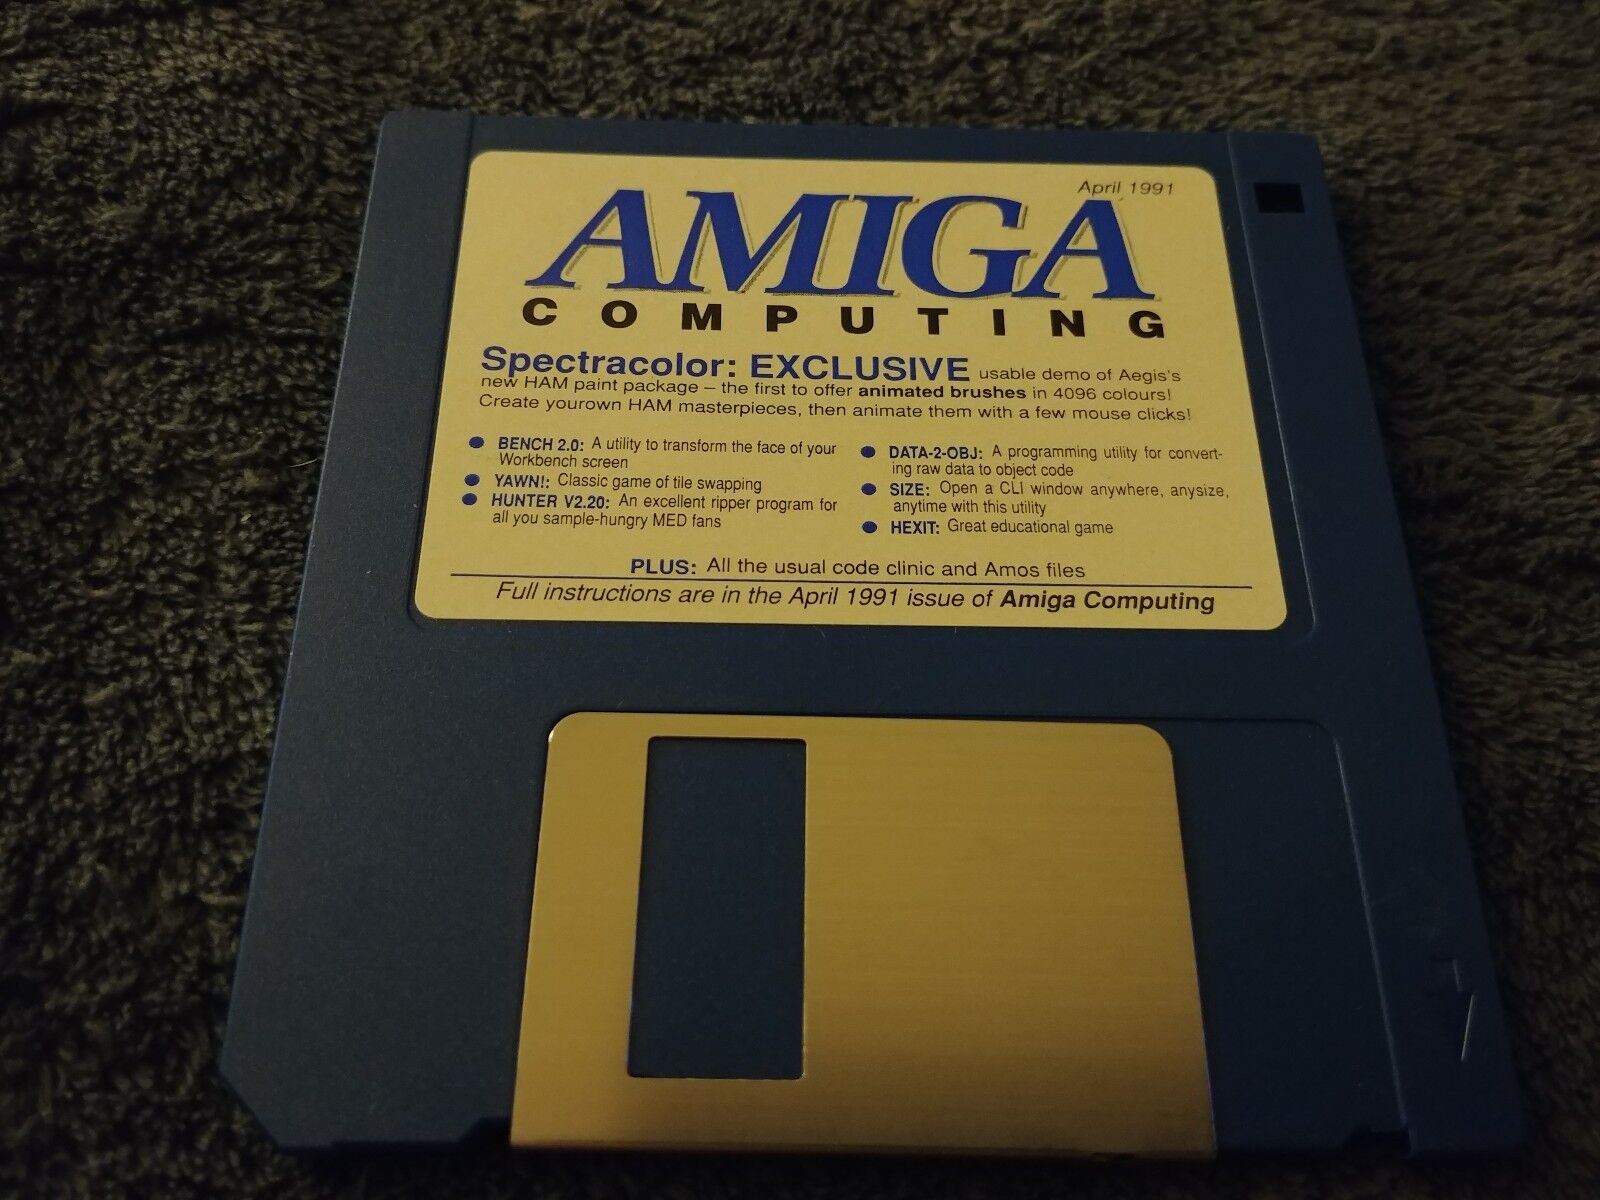 Spectracolor Floppy Software For The Amiga